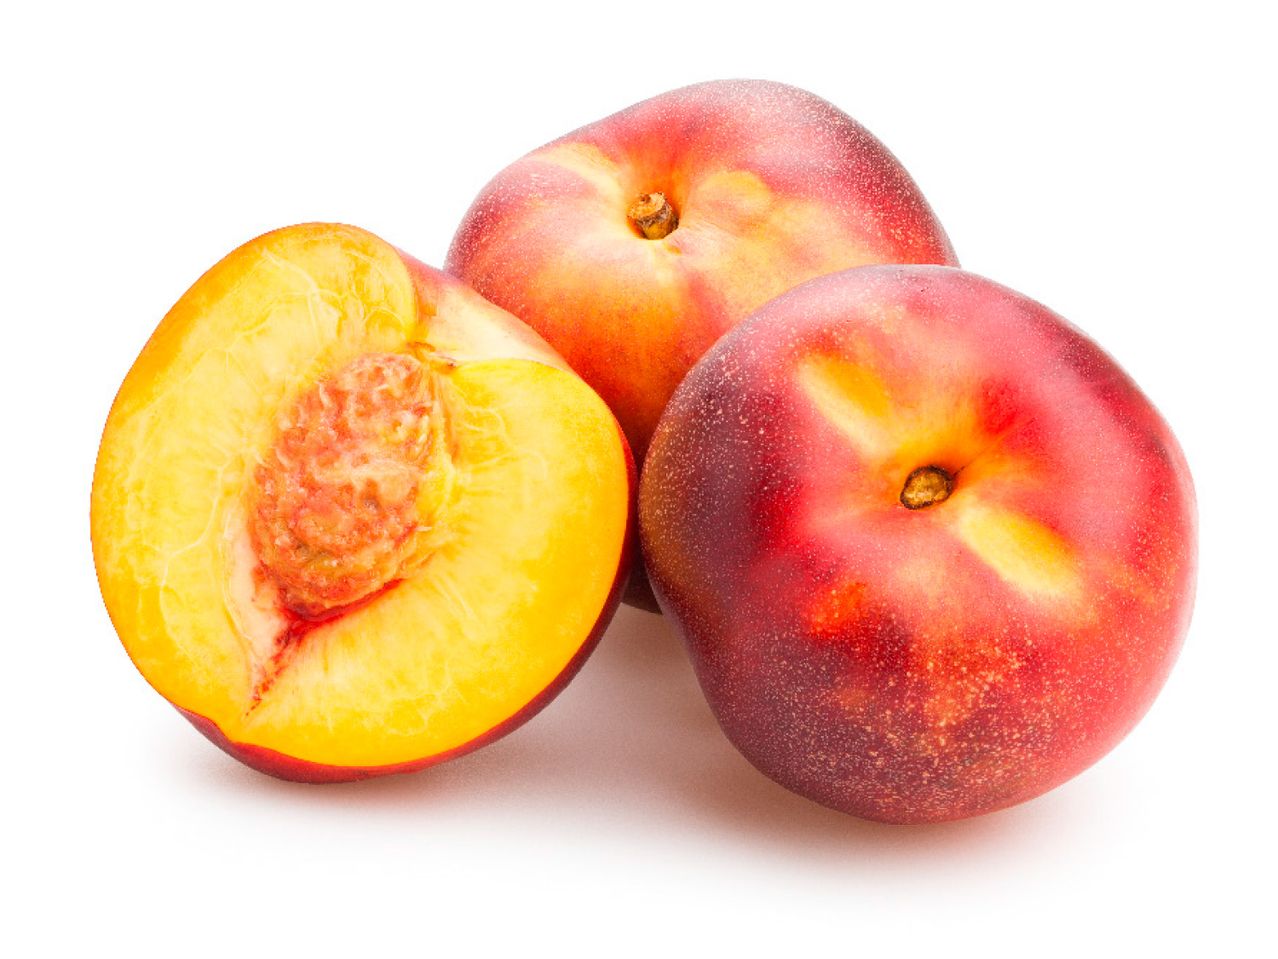 Go to full screen view: Nectarines - Image 1